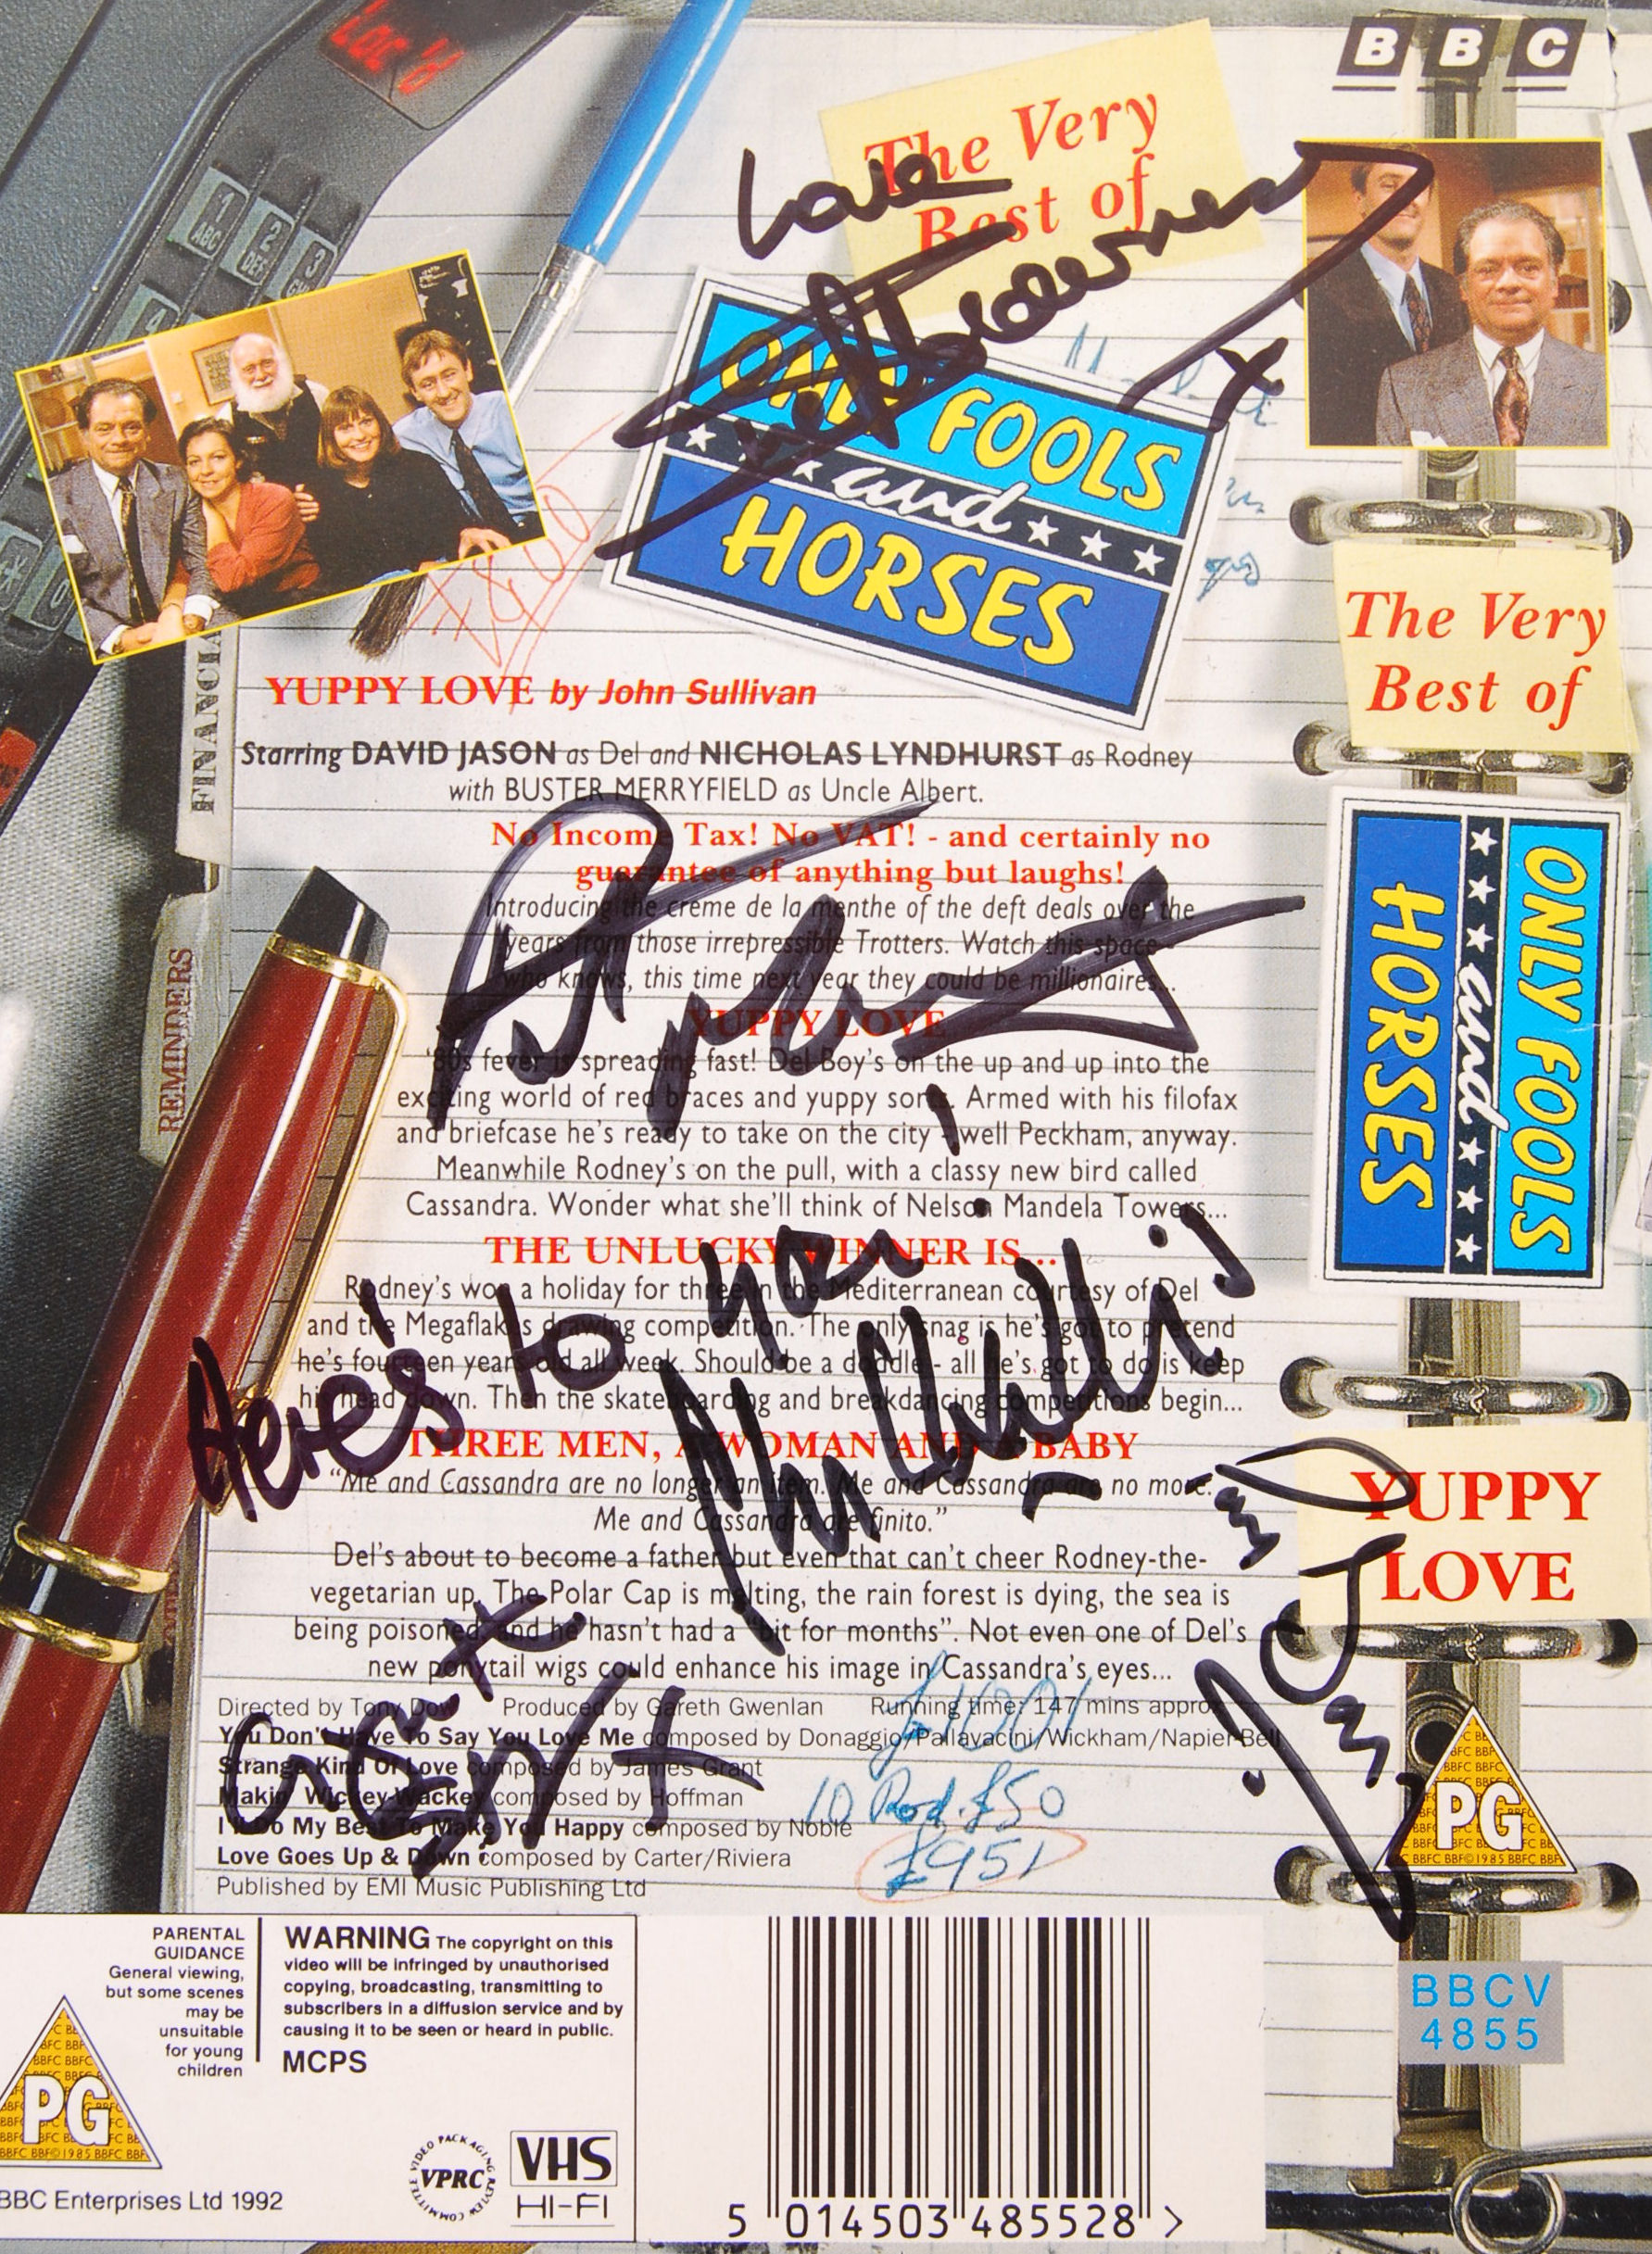 ONLY FOOLS & HORSES - CAST AUTOGRAPHED VHS COVER - Image 4 of 4